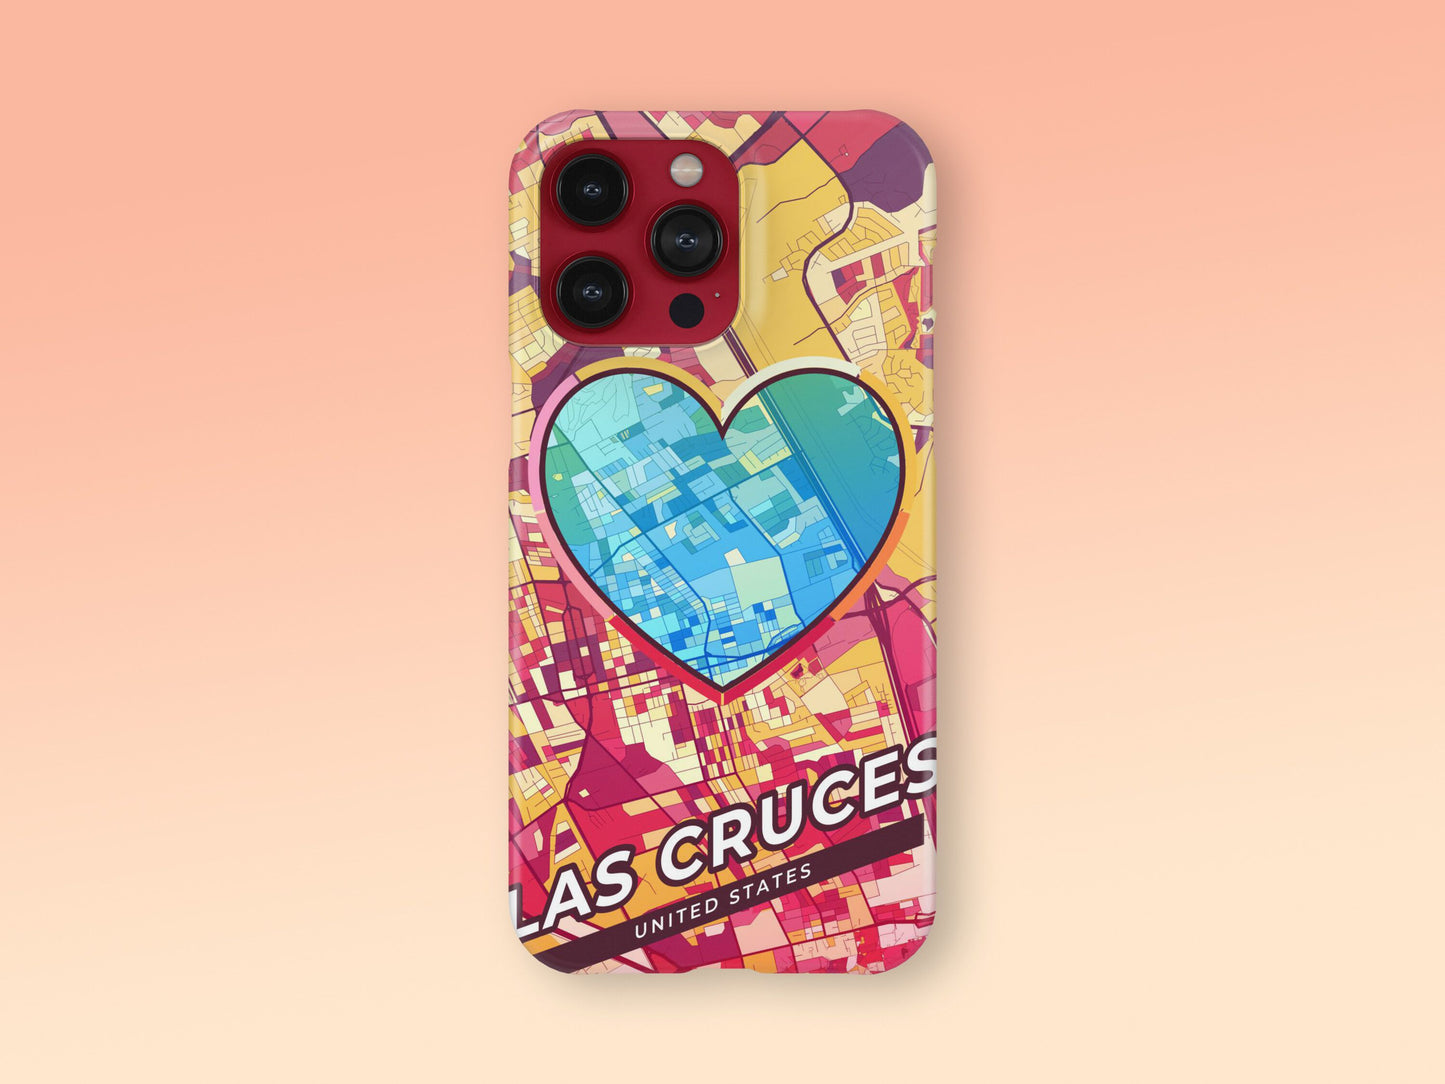 Las Cruces New Mexico slim phone case with colorful icon. Birthday, wedding or housewarming gift. Couple match cases. 2